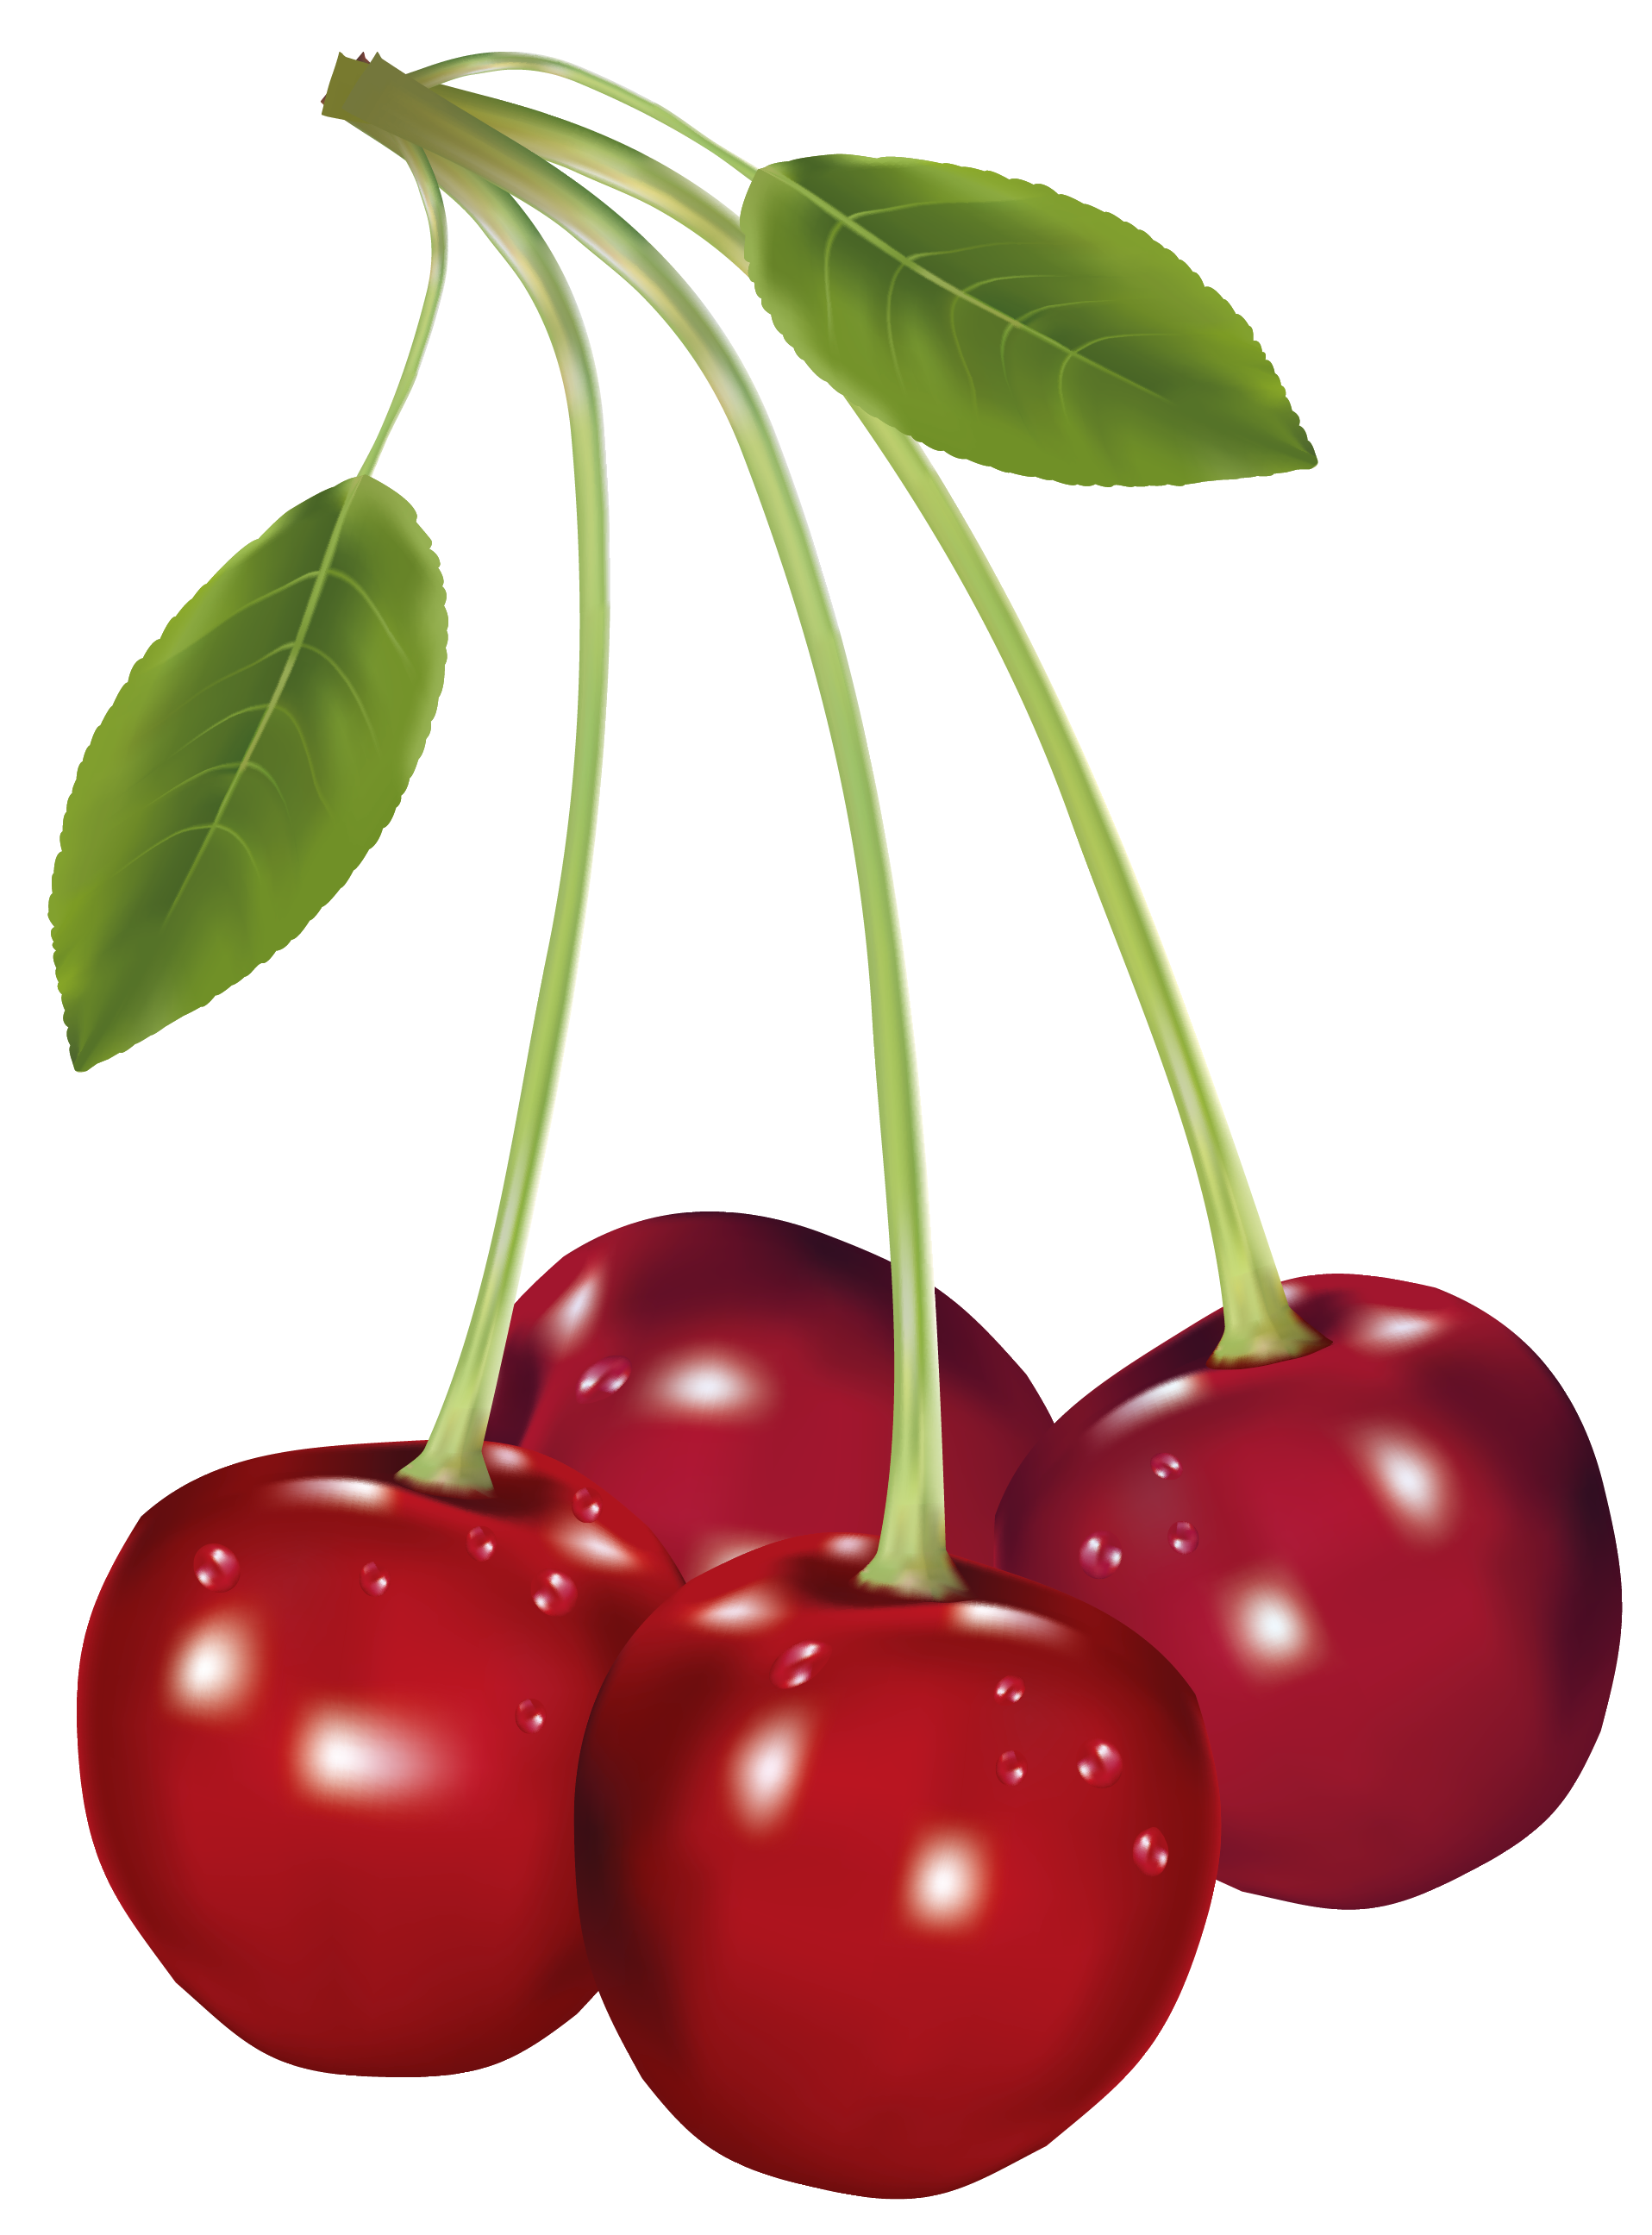 Cherries png picture gallery. Foods clipart plant